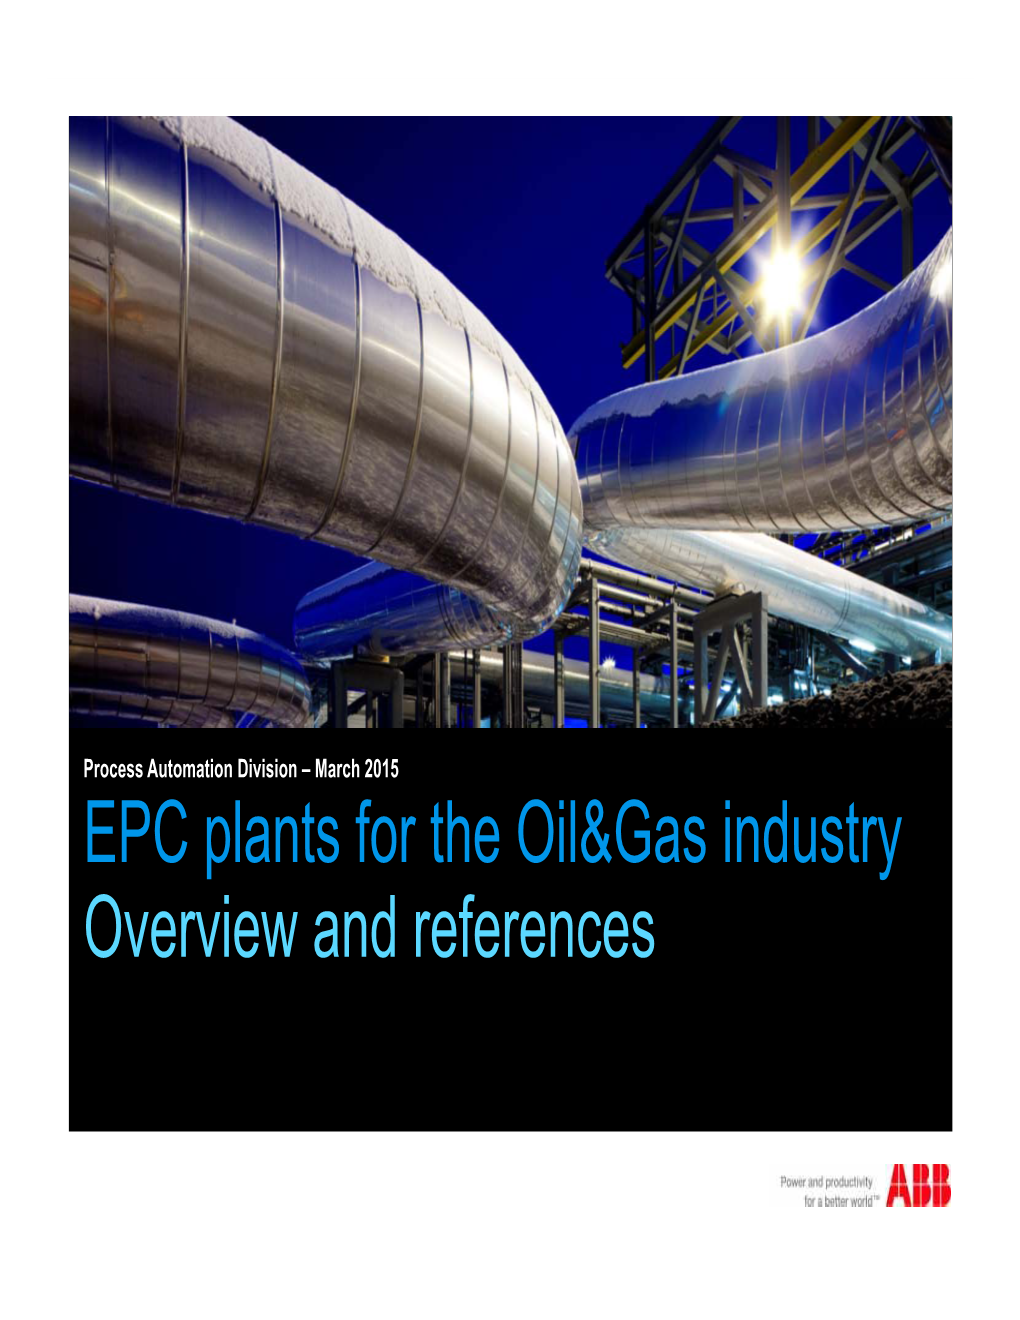 EPC Plants for the Oil&Gas Industry Overview and References